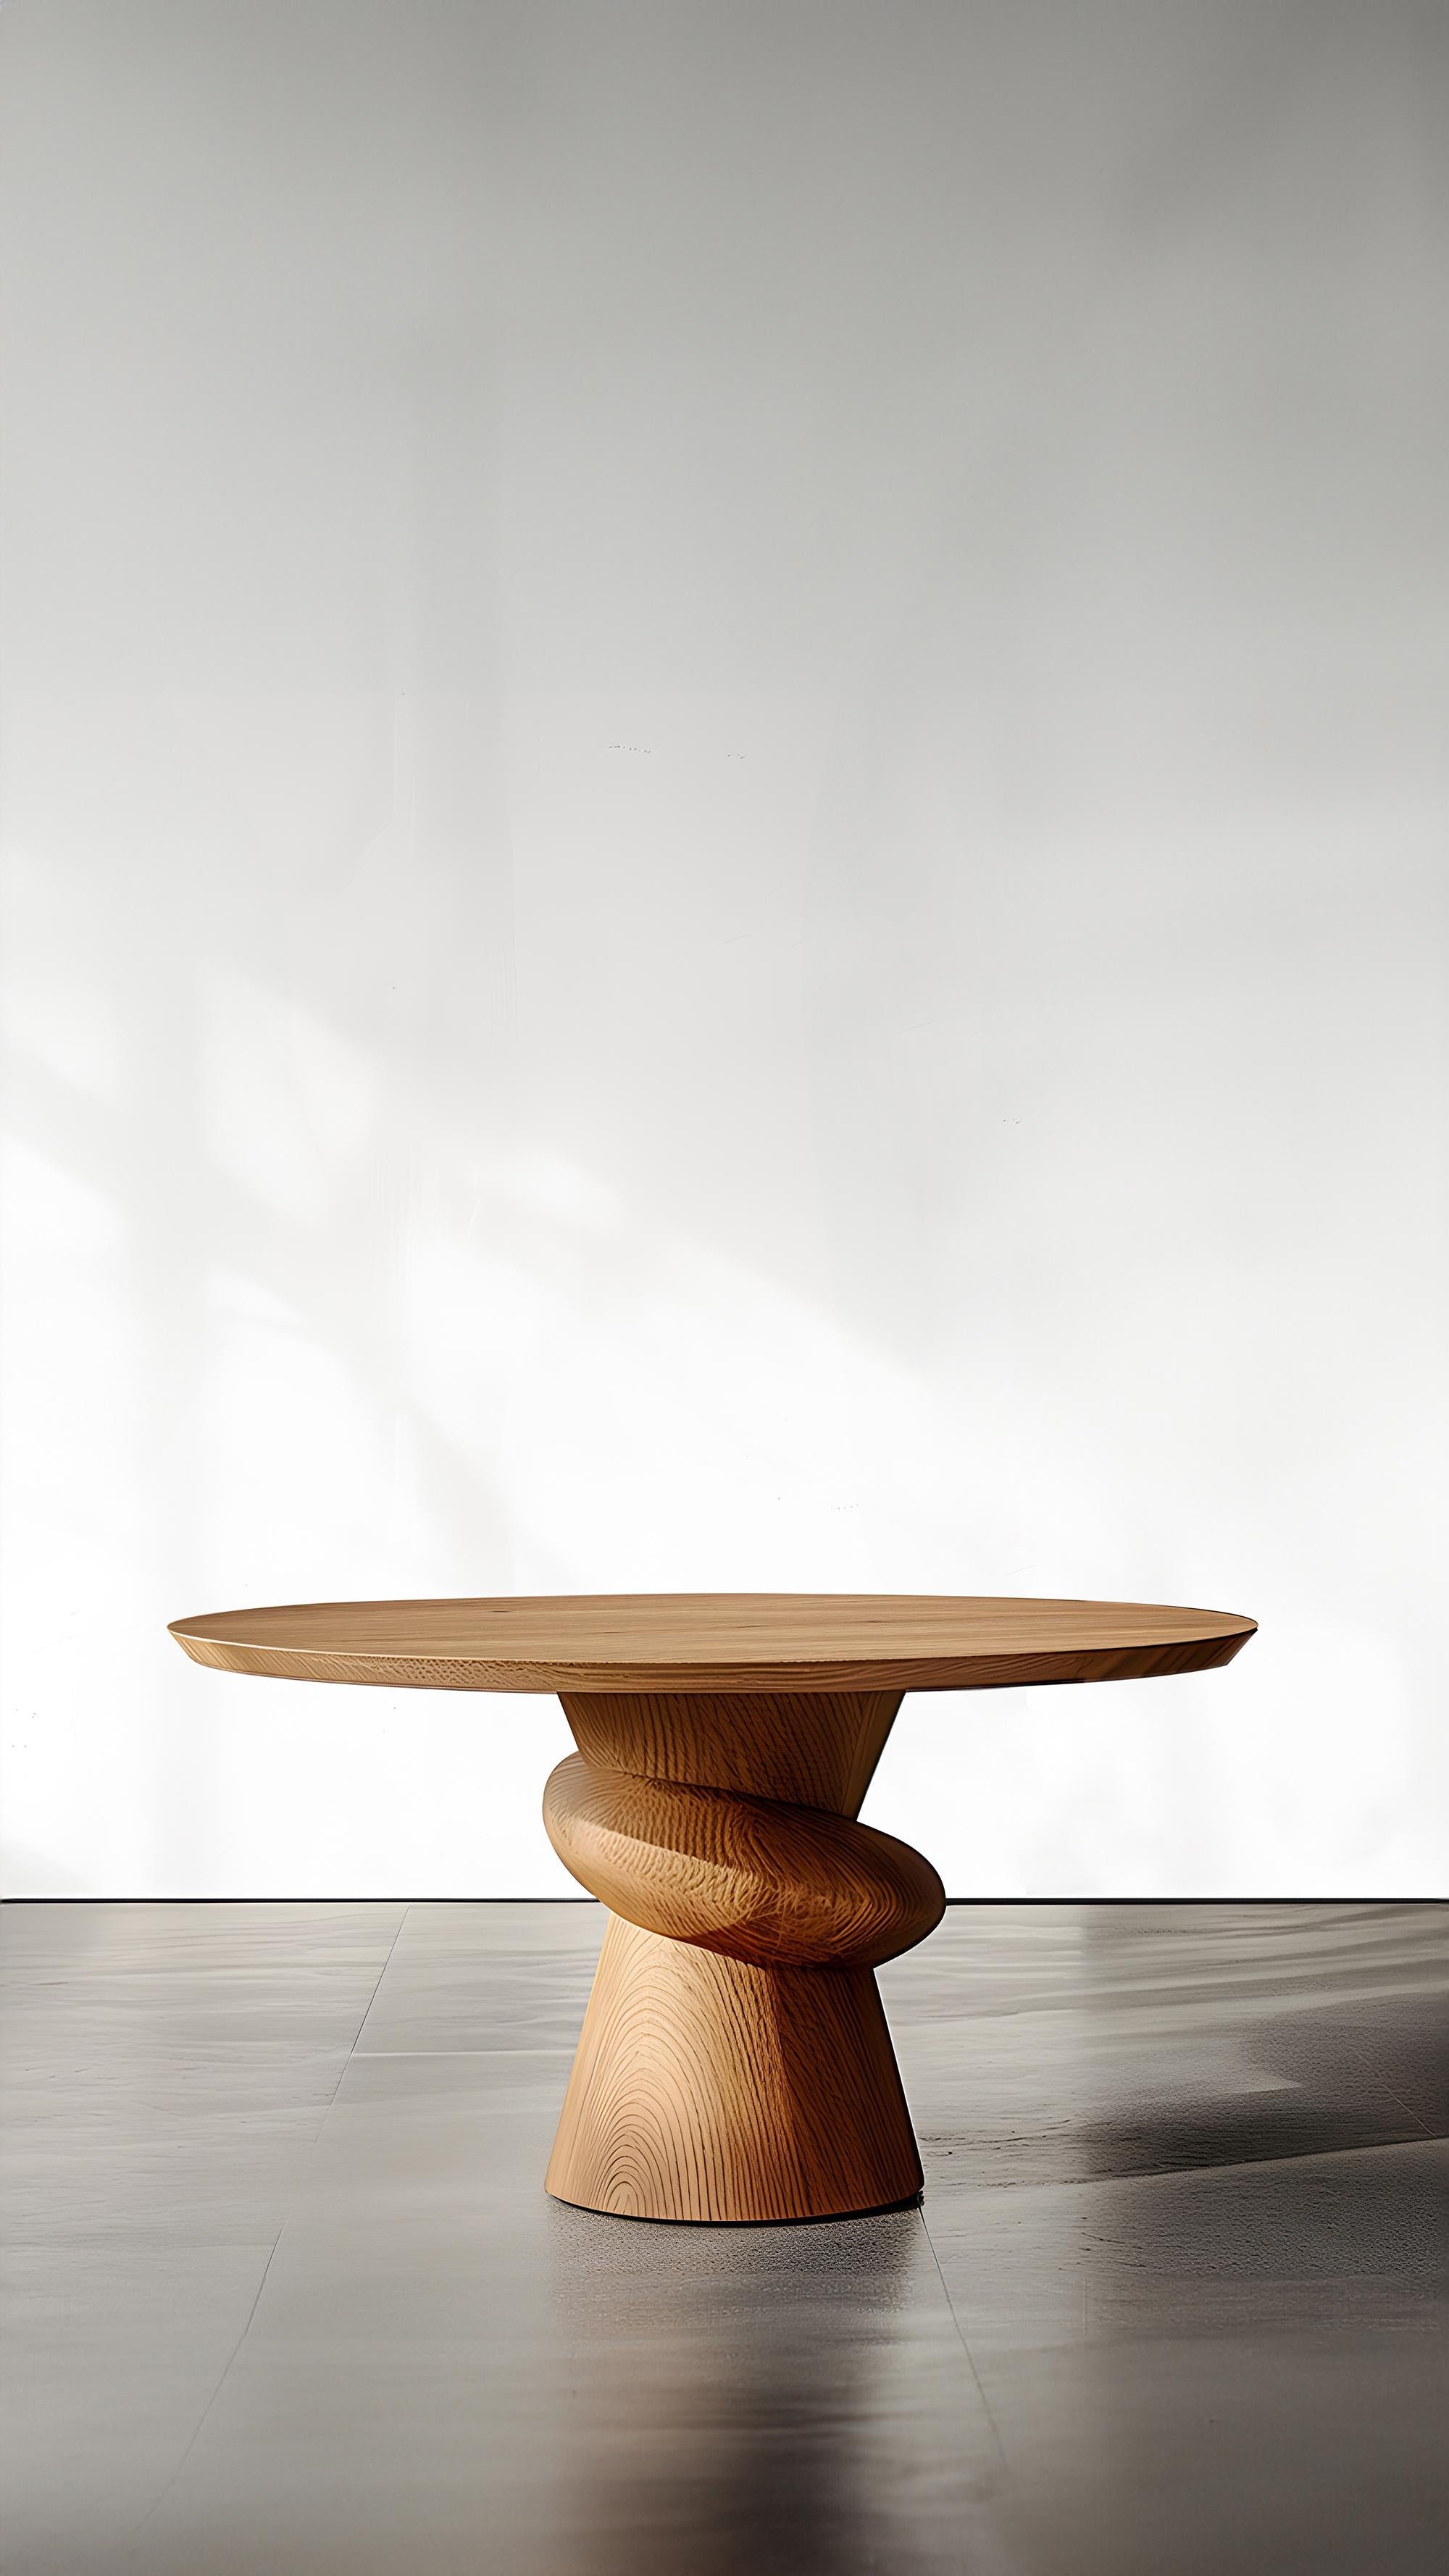 Hand-Crafted Desks and Writing Tables No09, Socle Series by Joel Escalona, Wood Craft For Sale